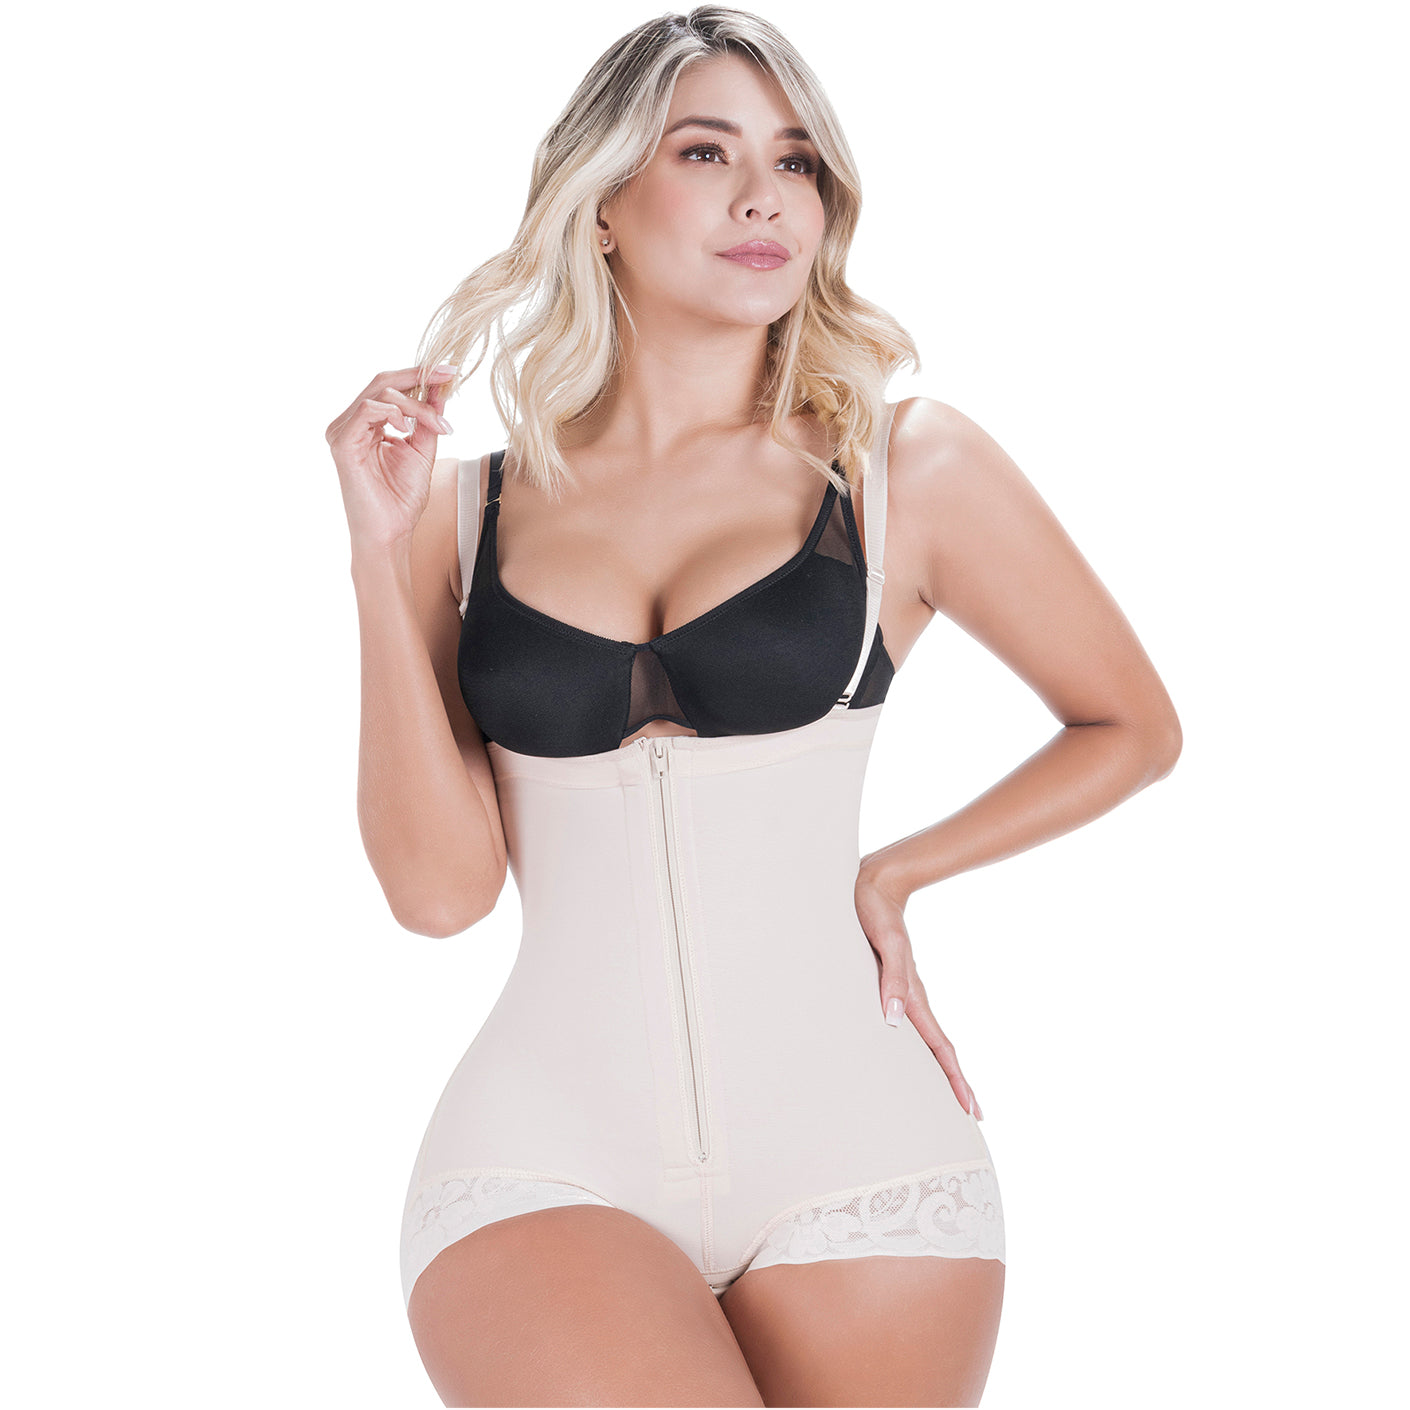 Bella Faja Girdle Body Suit with front zipper  Waist training corsets  Toronto, Butt Lifters, Thermal Latex Body